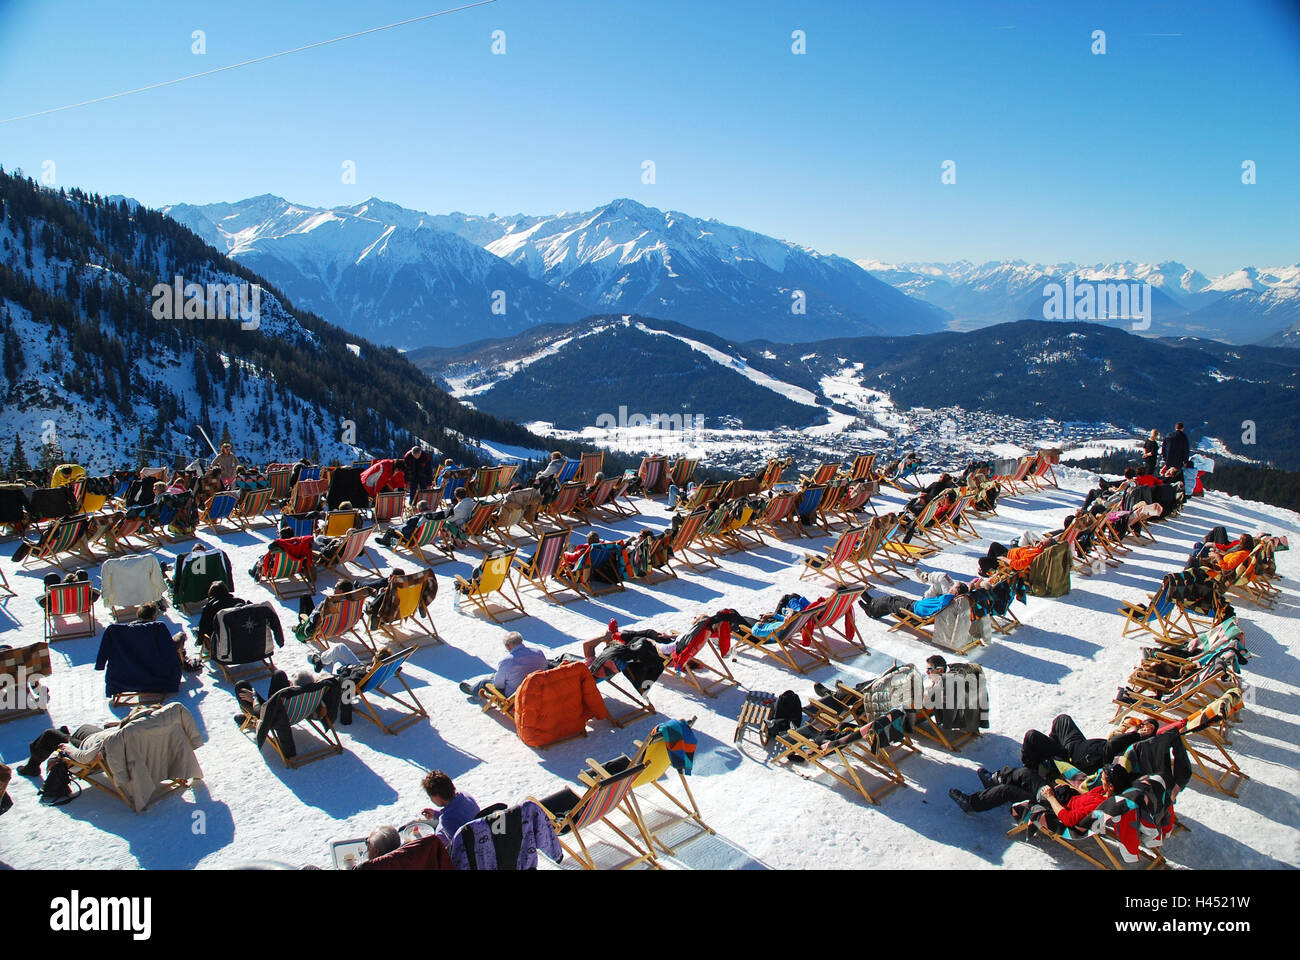 Austria, Tyrol, sea field, mountain horse hut, sun terrace, deck chairs, tourists, Nordtirol, tourist resort, tourism, tourism, winter sports, winter sports place, winter sports area, snow, cloudless, sunny, people, leisure time, hobby, break, rest, view, alps, mountains, panorama, Stock Photo